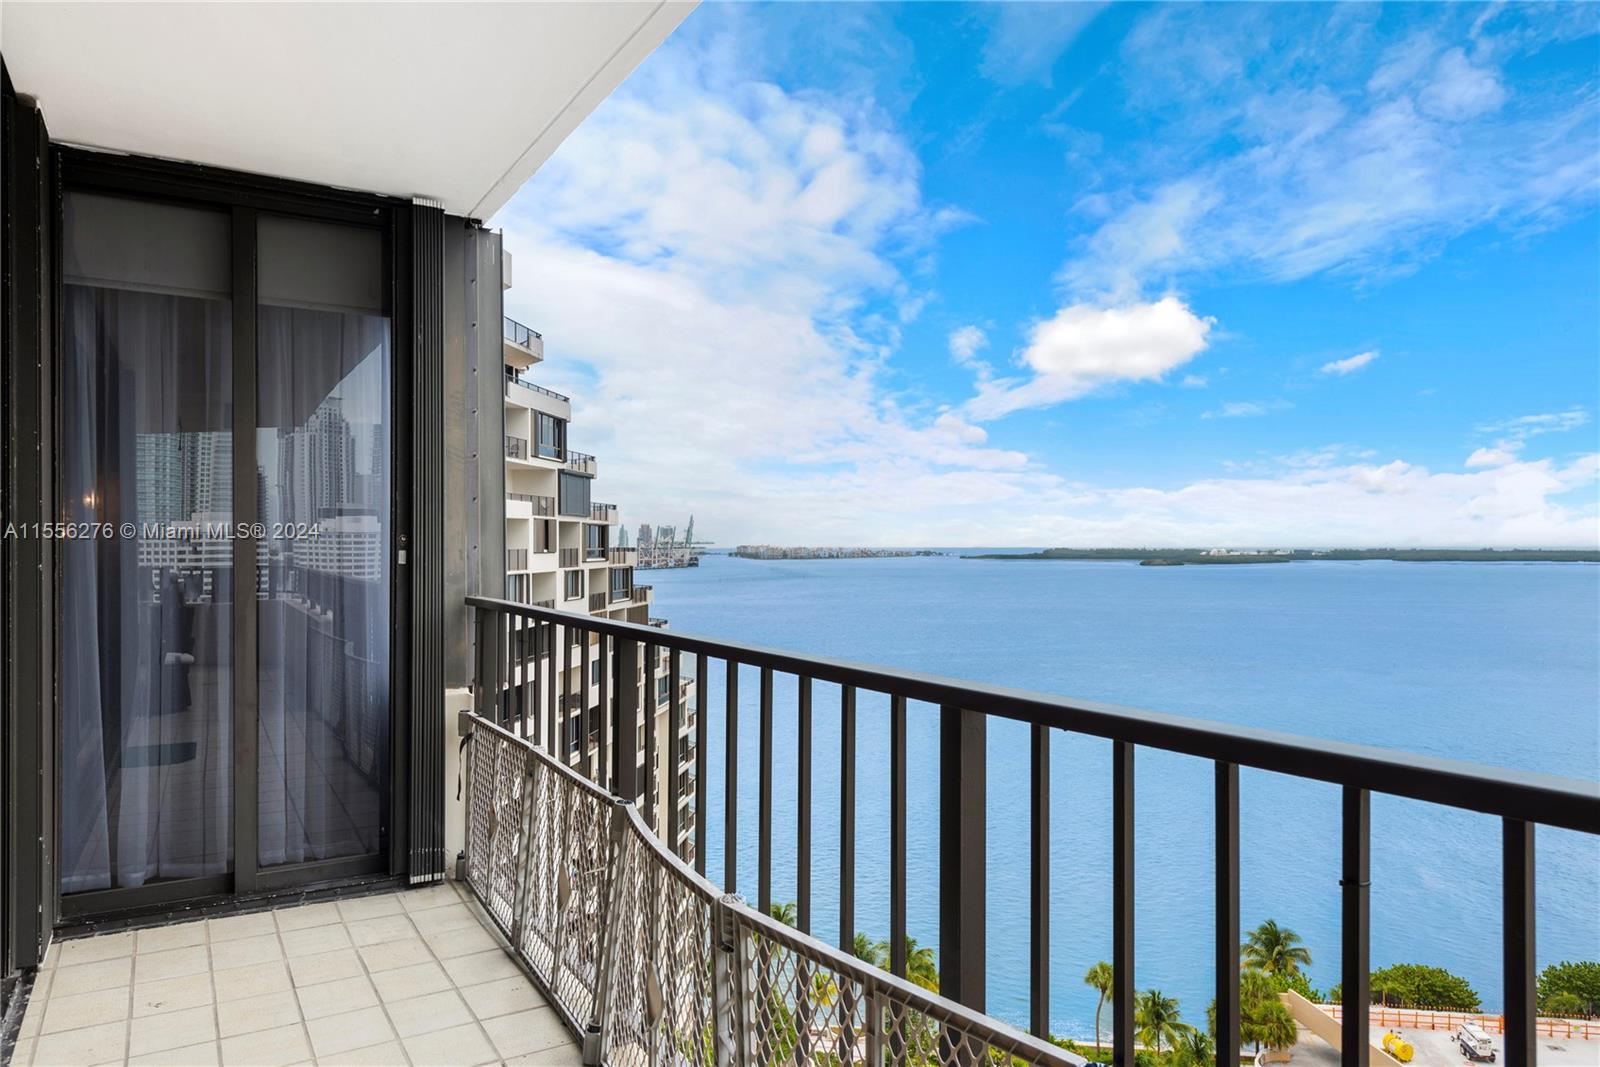 520 Brickell Key Dr A1815, Miami, Florida 33131, 2 Bedrooms Bedrooms, ,2 BathroomsBathrooms,Residentiallease,For Rent,520 Brickell Key Dr A1815,A11556276